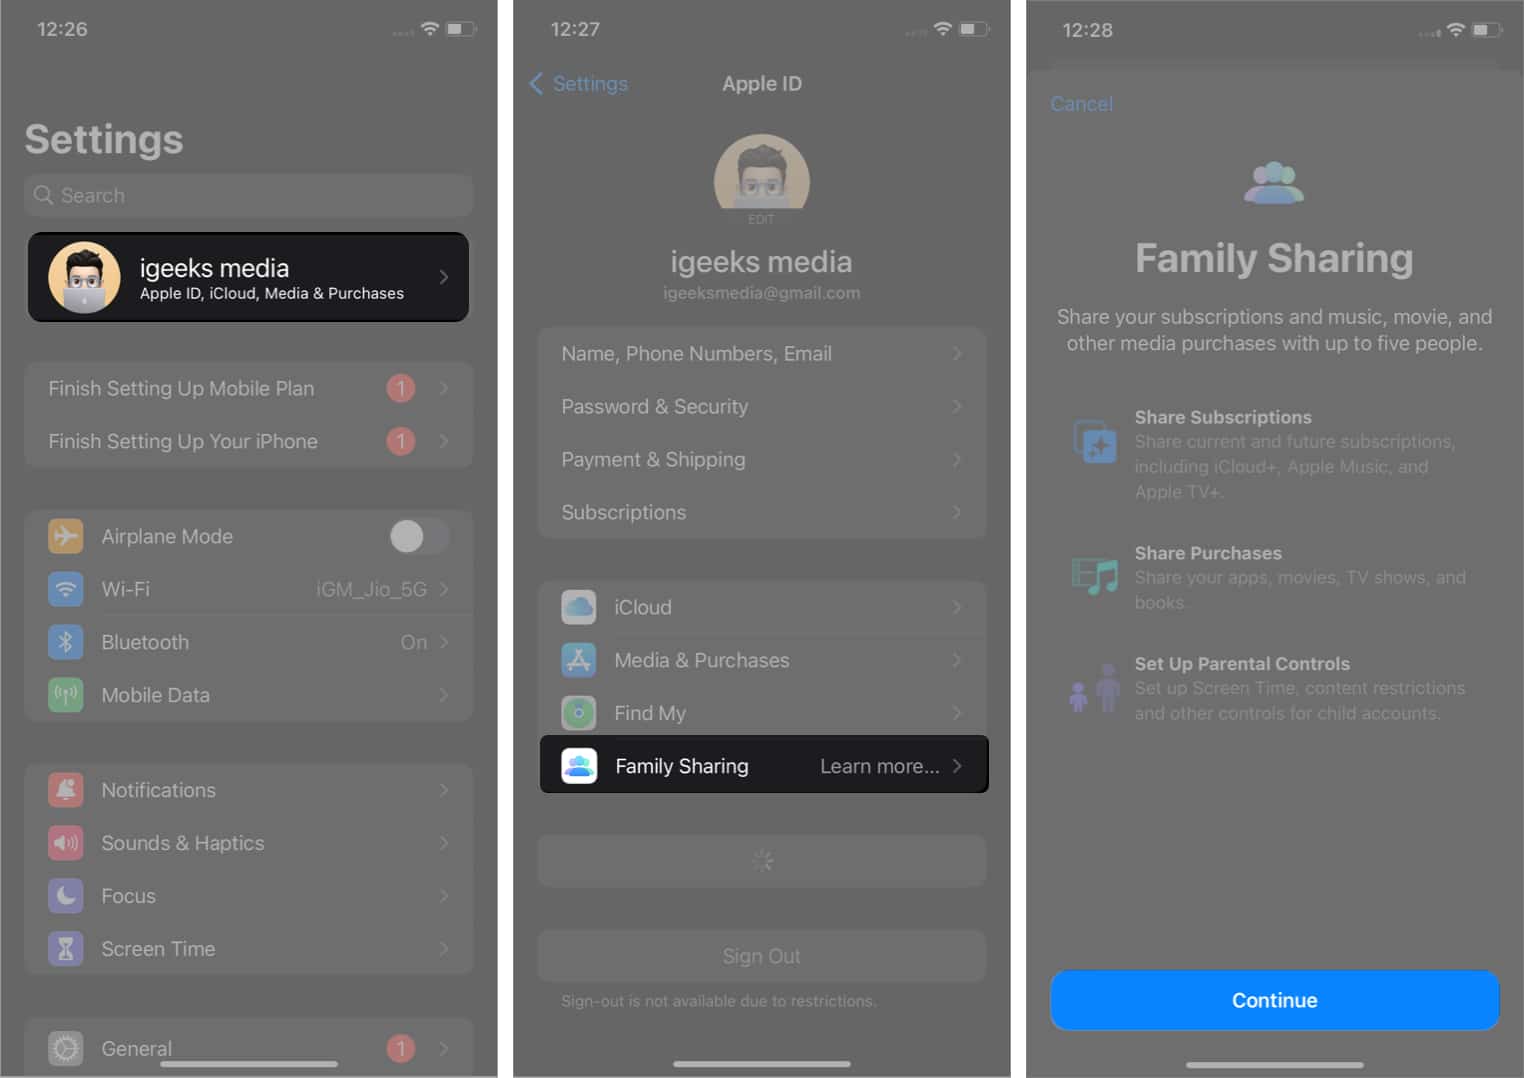 Tap Continue to set up Family Sharing on iPhone